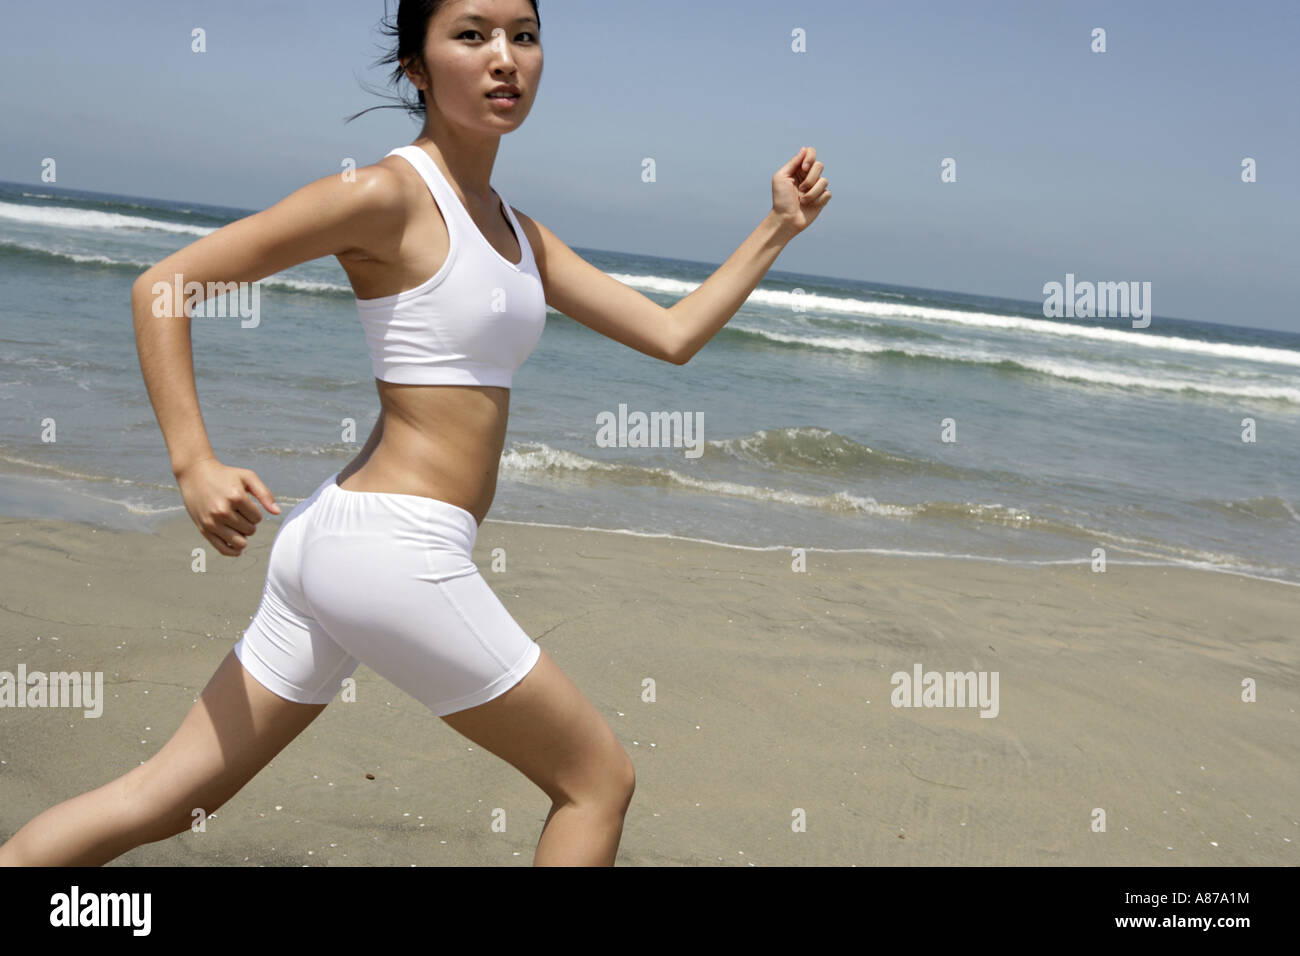 A young woman is running on a beach. Stock Photo